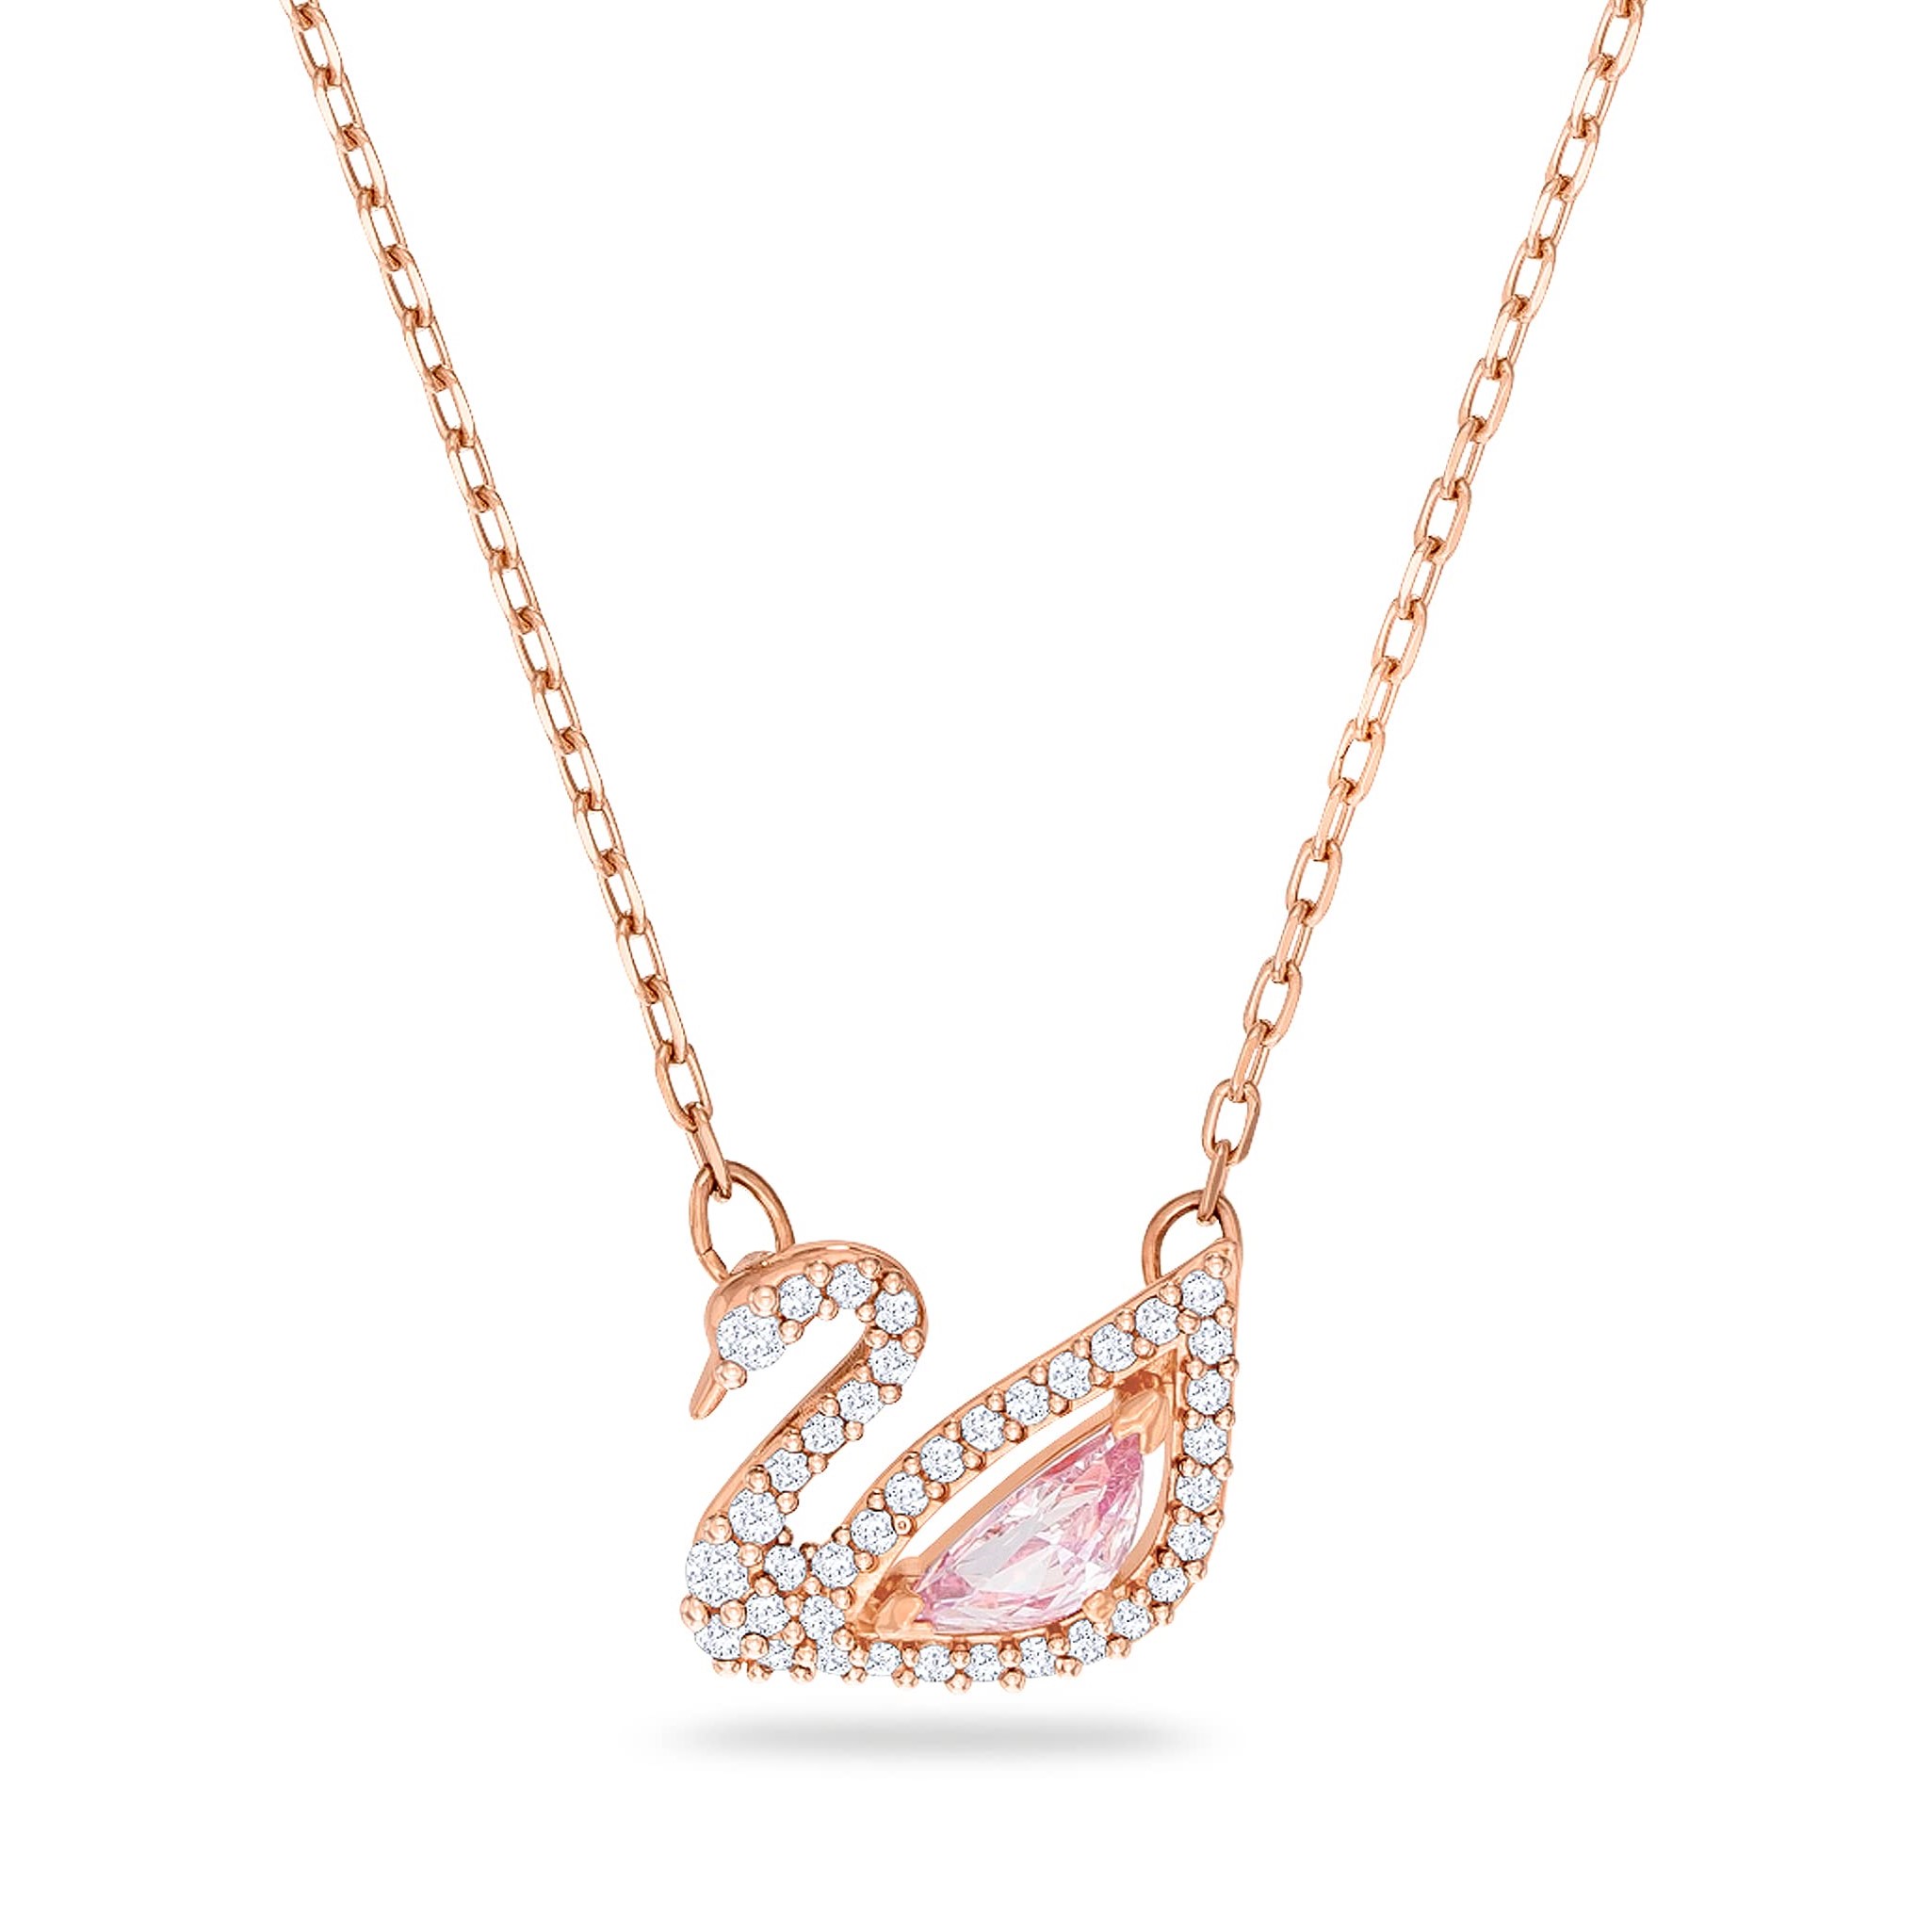 SET DÂY CHUYỀN VÒNG ĐEO TAY SWAROVSKI DAZZLING SWAN NECKLACE MULTI-COLORED ROSE-GOLD TONE PLATED 5469989 6